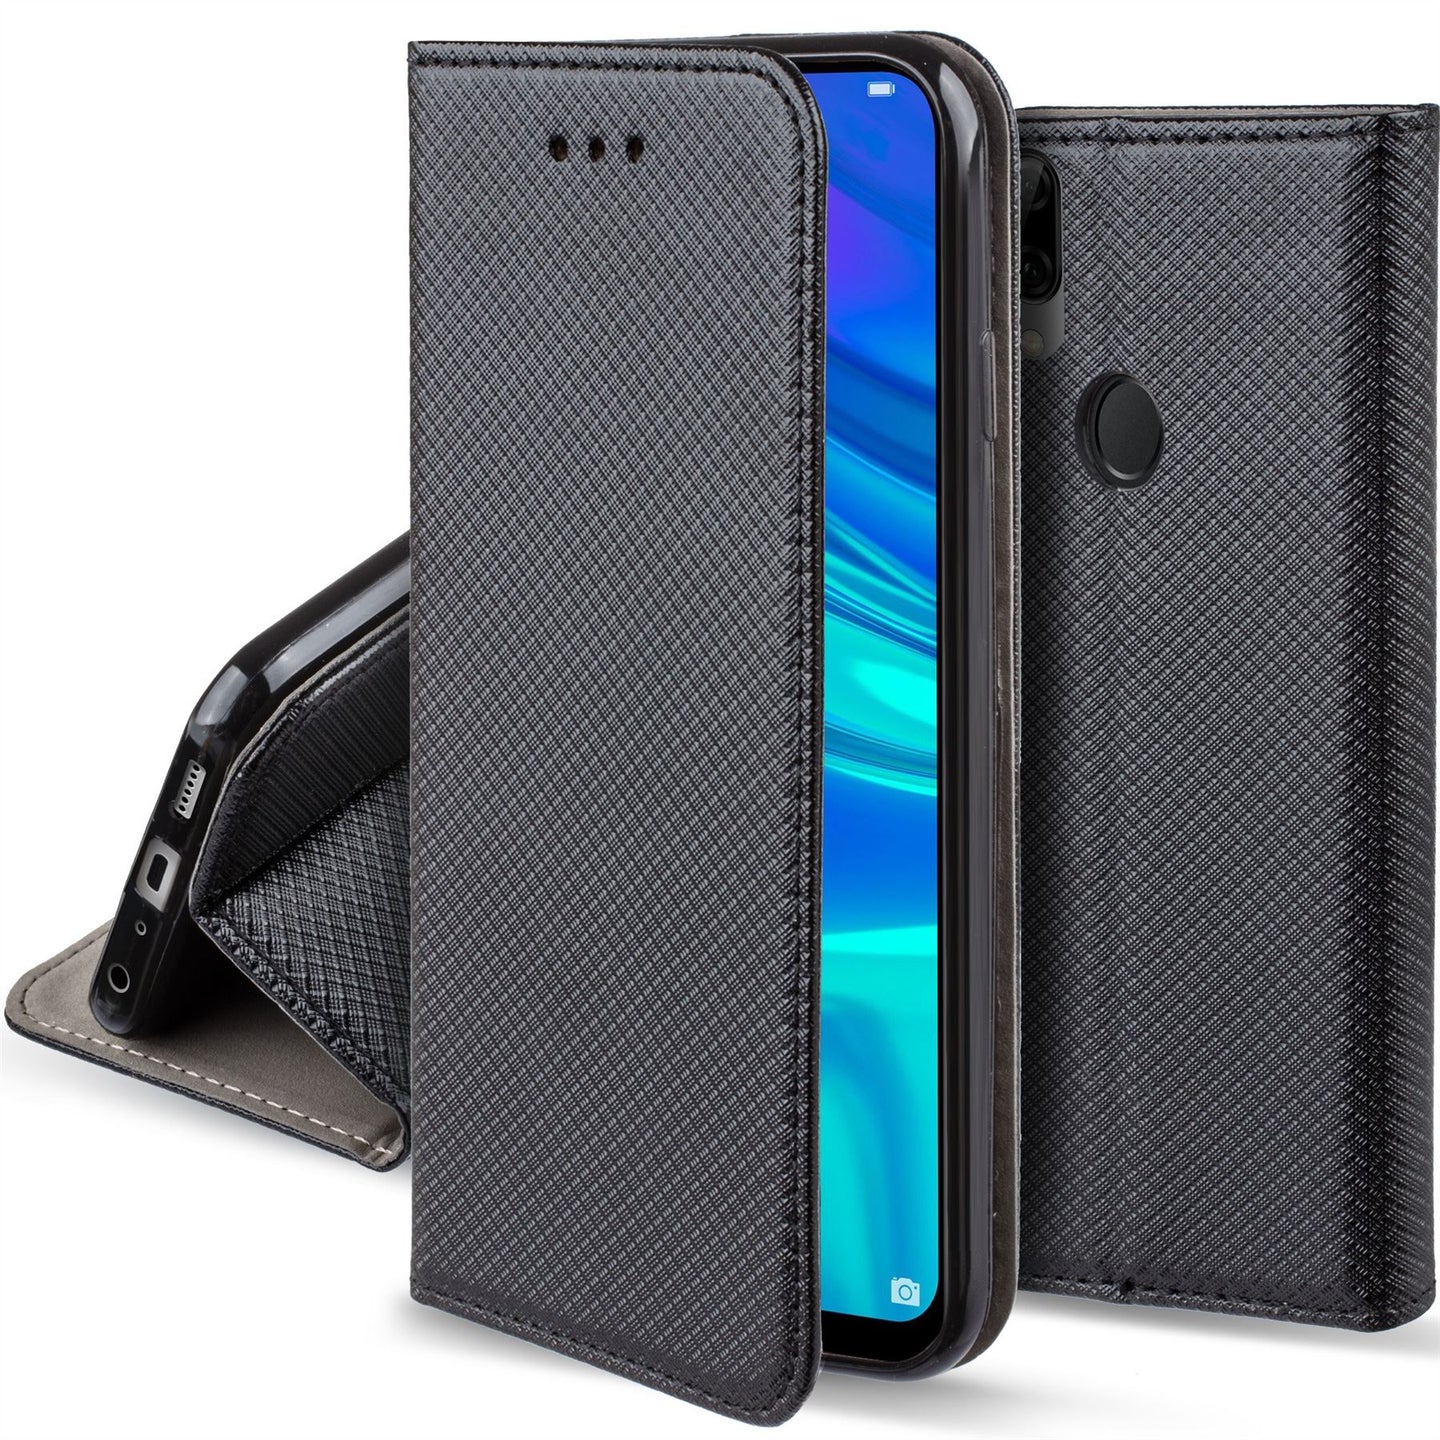 Moozy Case Flip Cover for Huawei P Smart 2019, Honor 10 Lite, Black - Smart Magnetic Flip Case with Card Holder and Stand